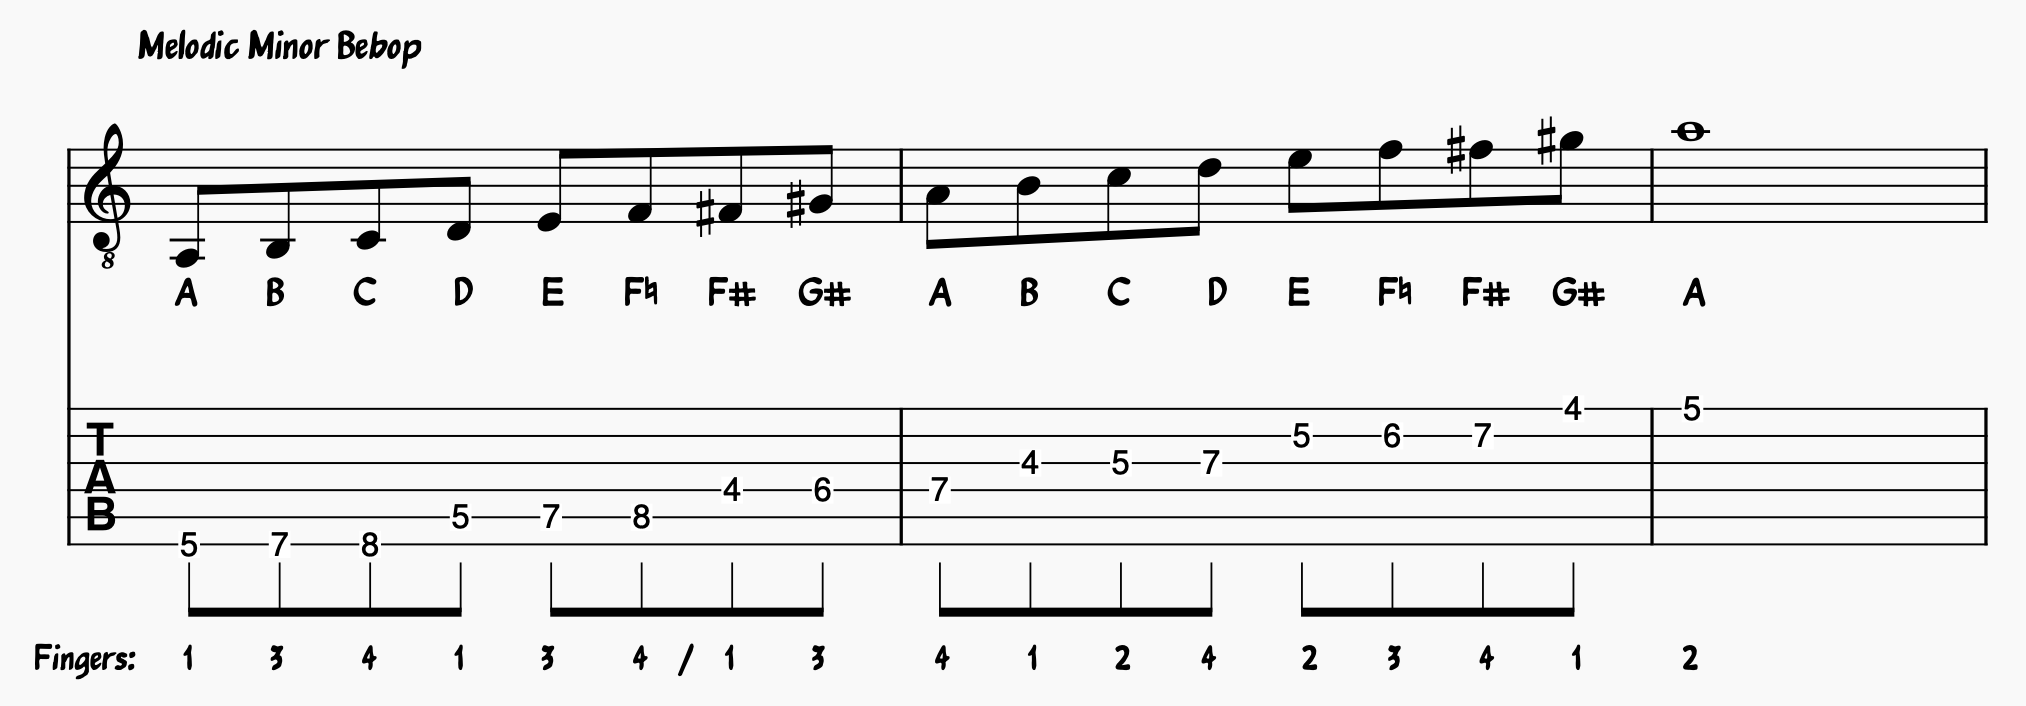 Melodic minor bebop scale on Guitar